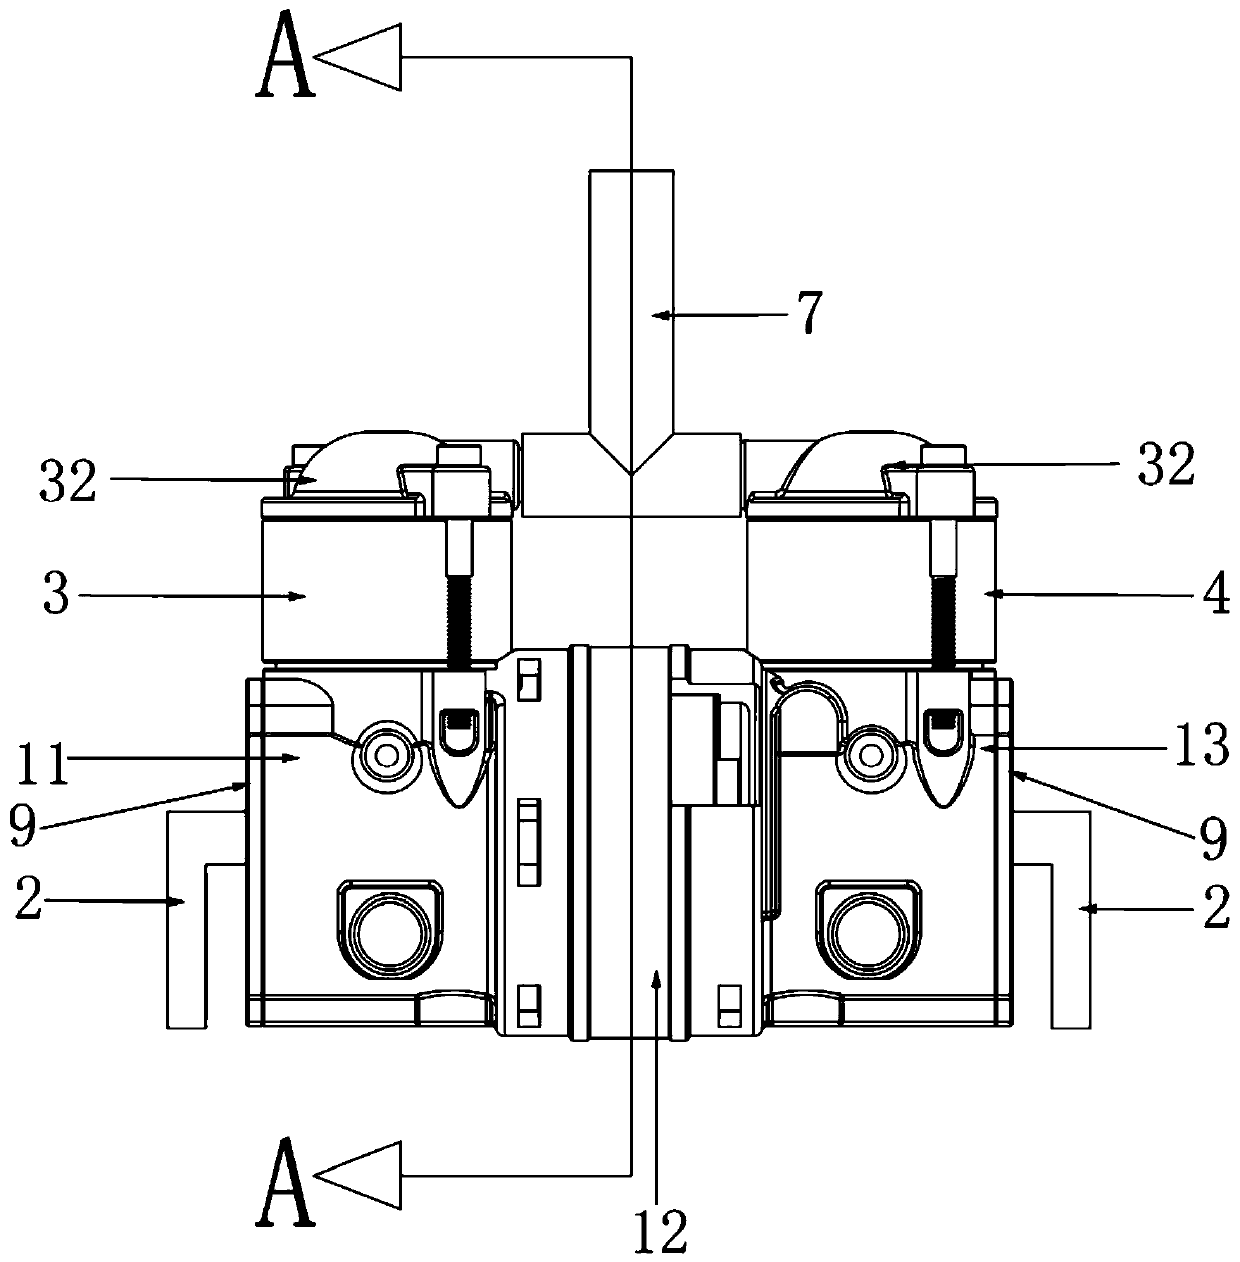 Micro oil-free double-cylinder compressor